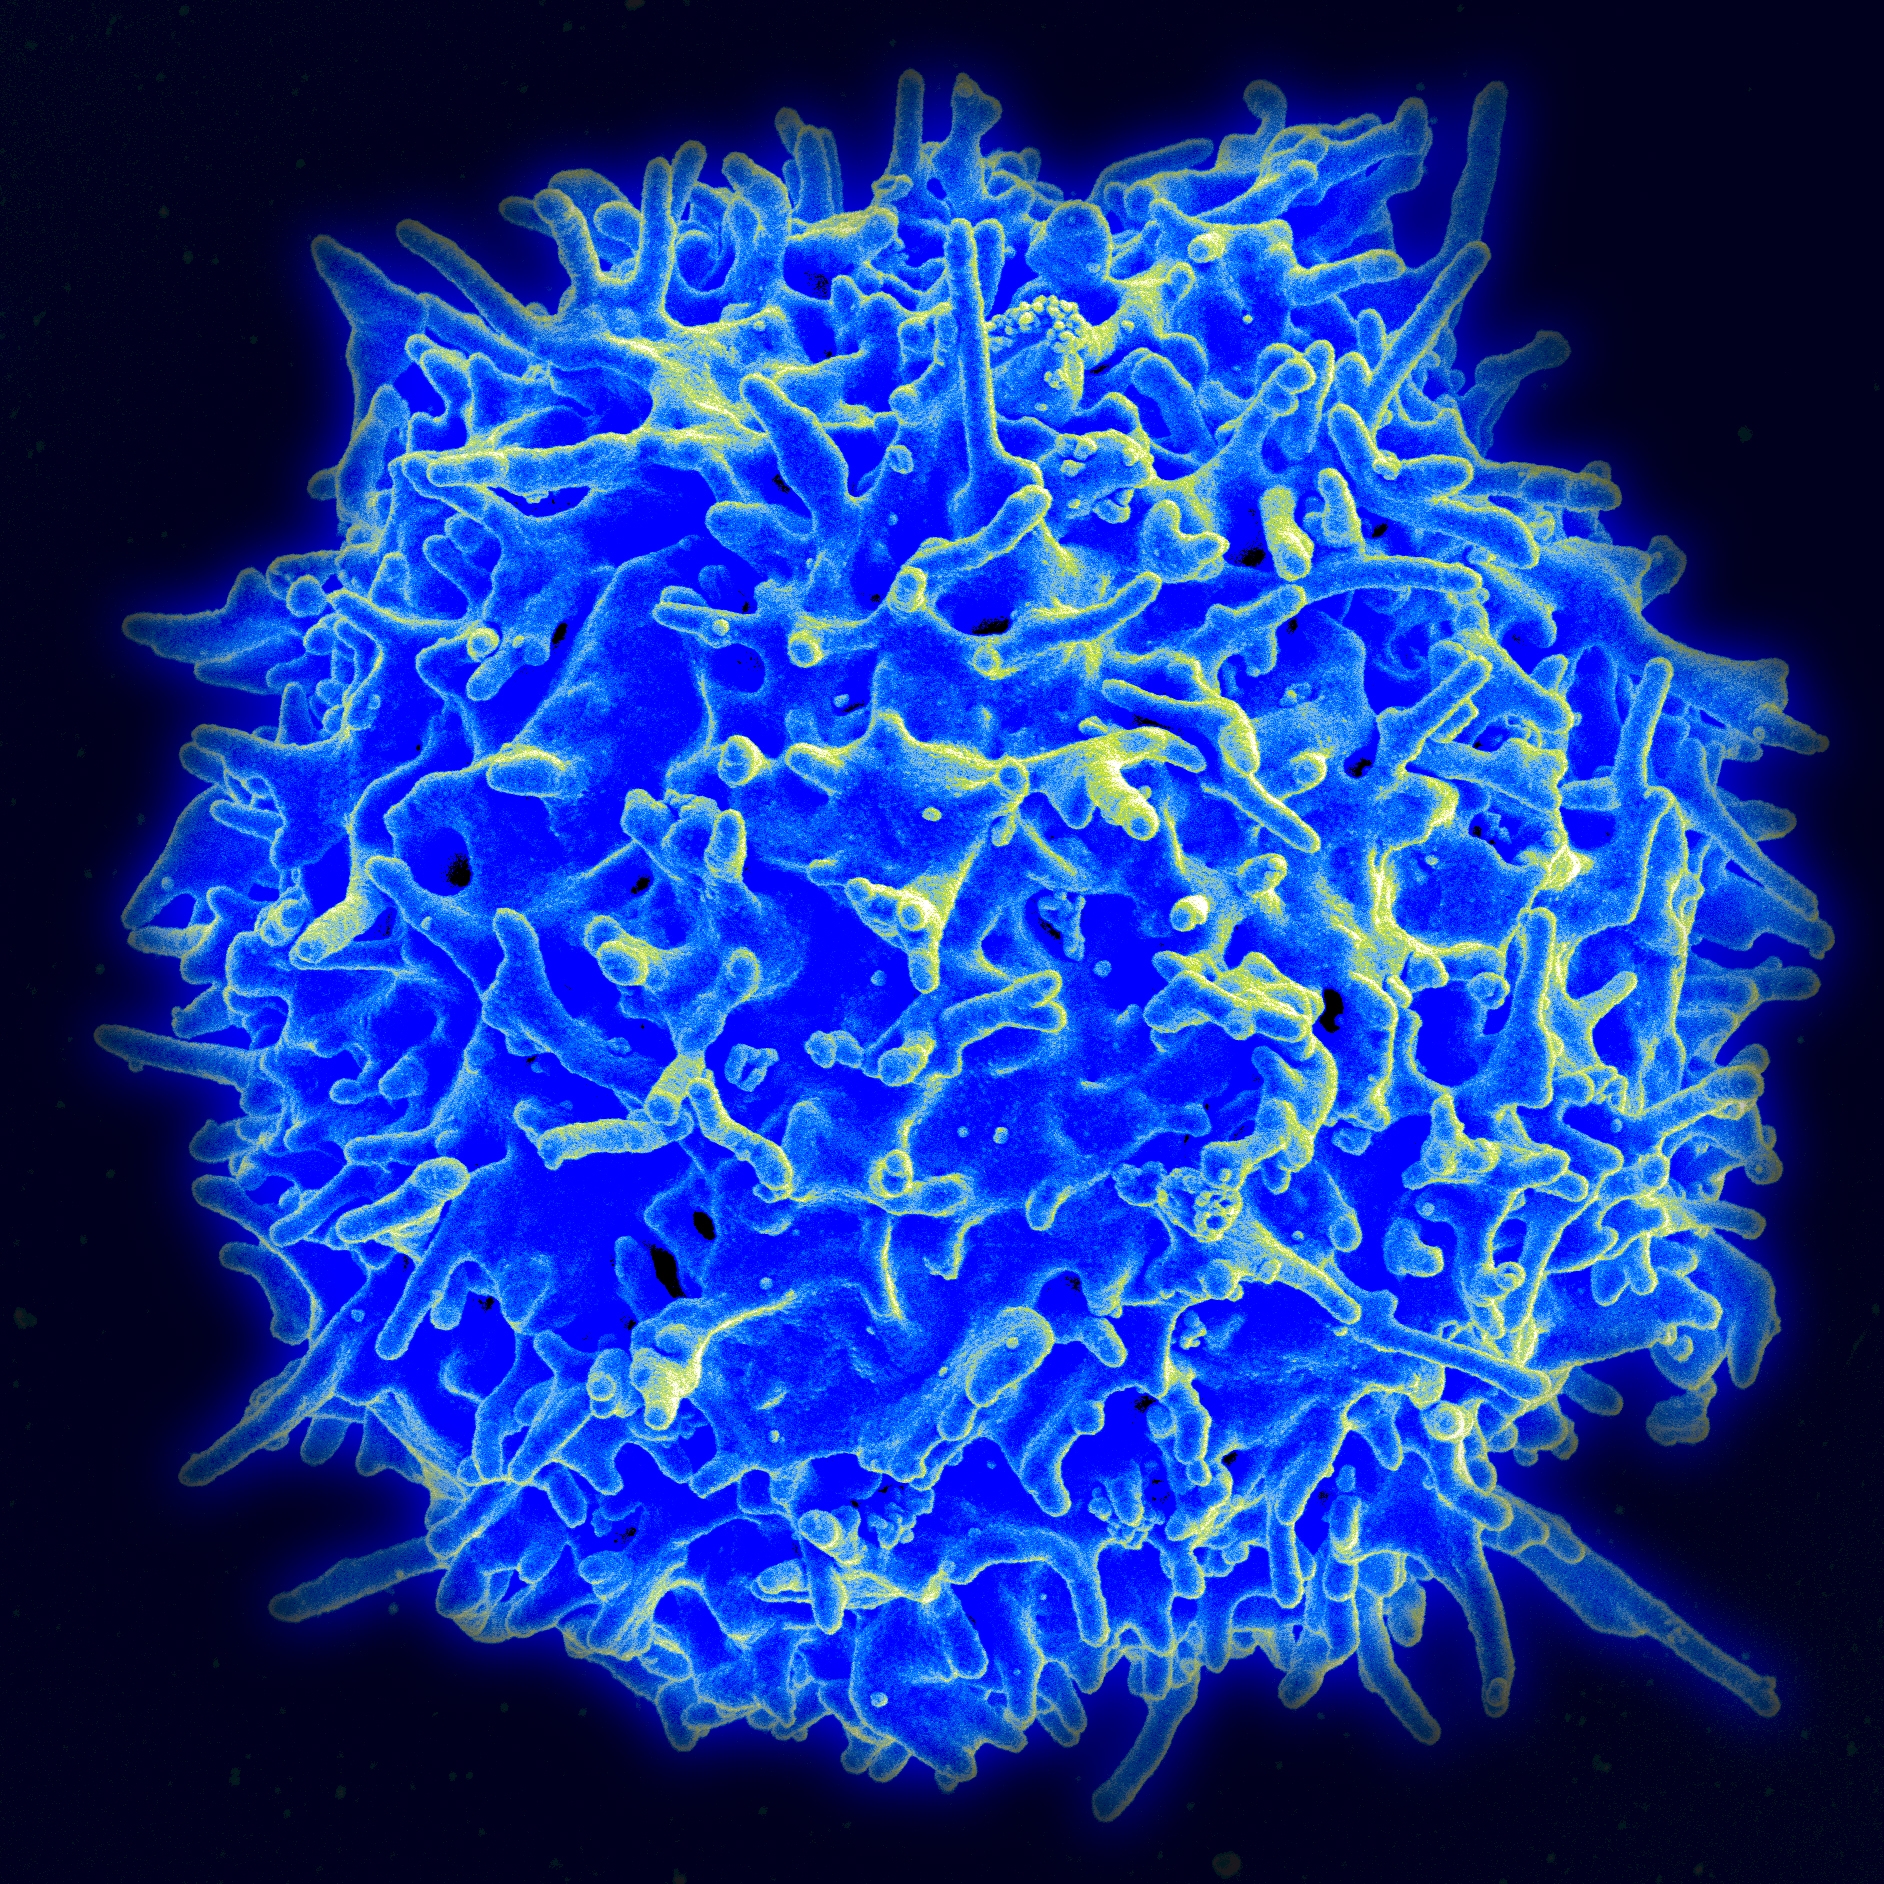 image of a T-cell